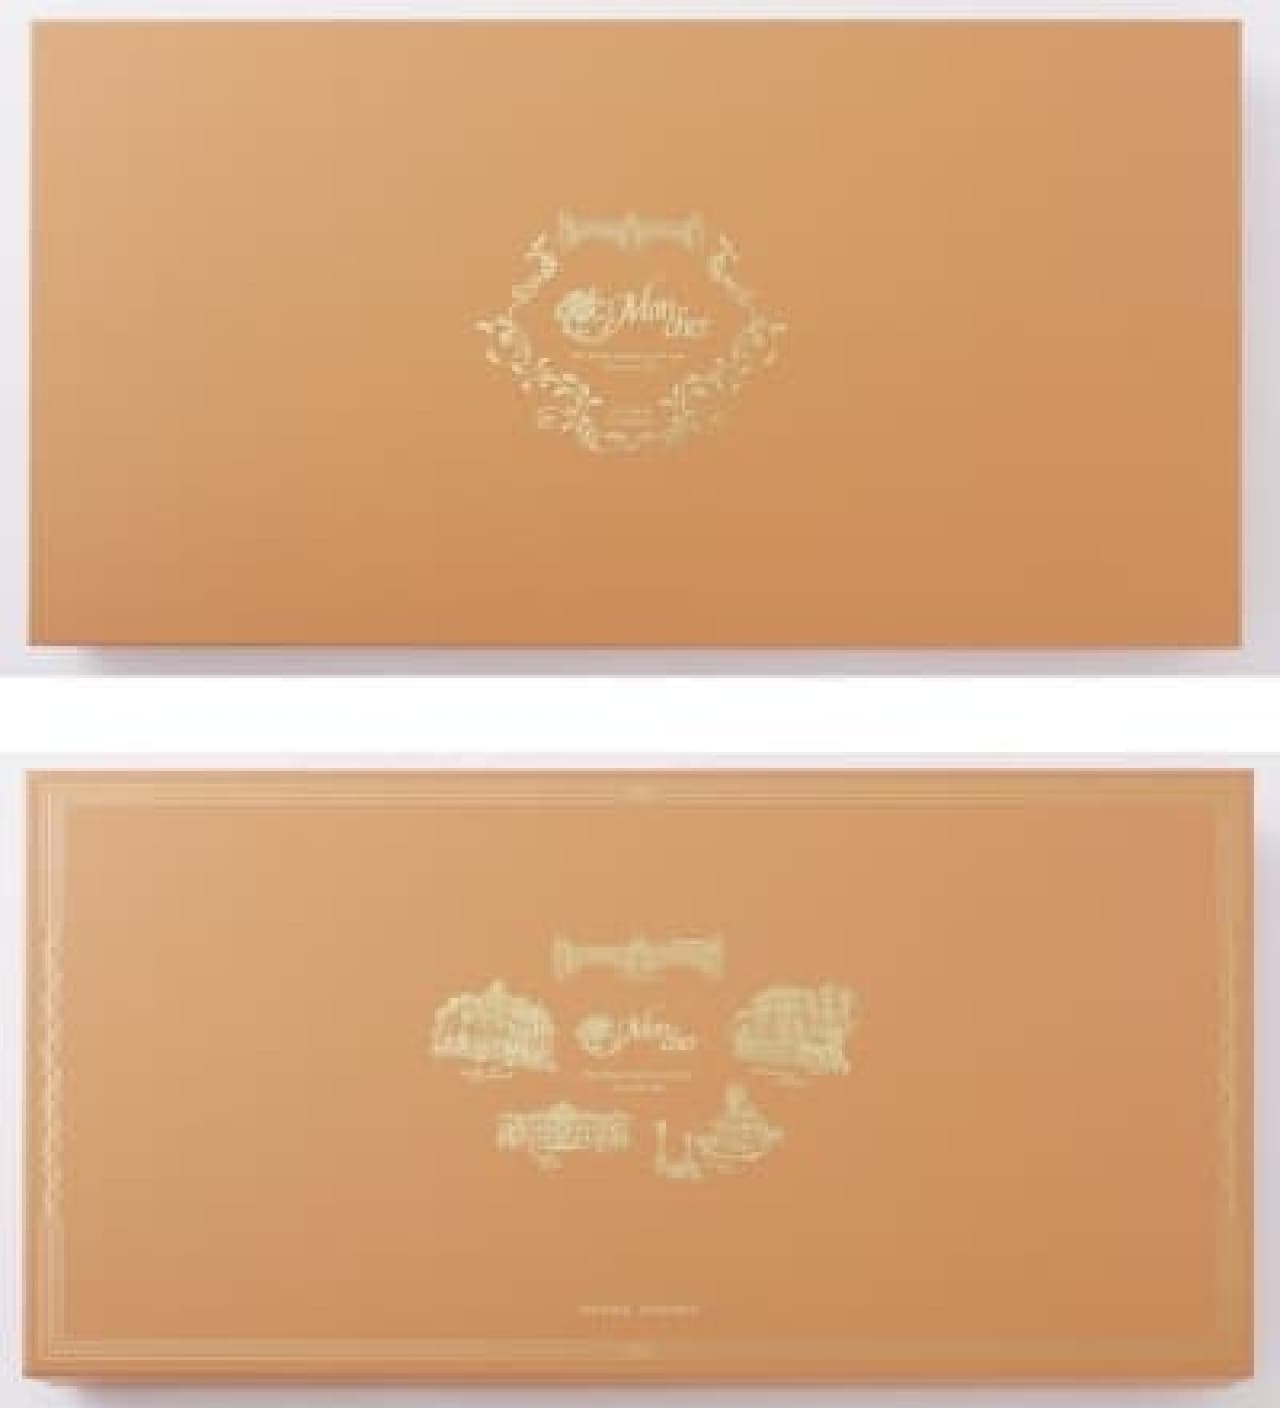 National version package (top) and Osaka limited package (bottom)